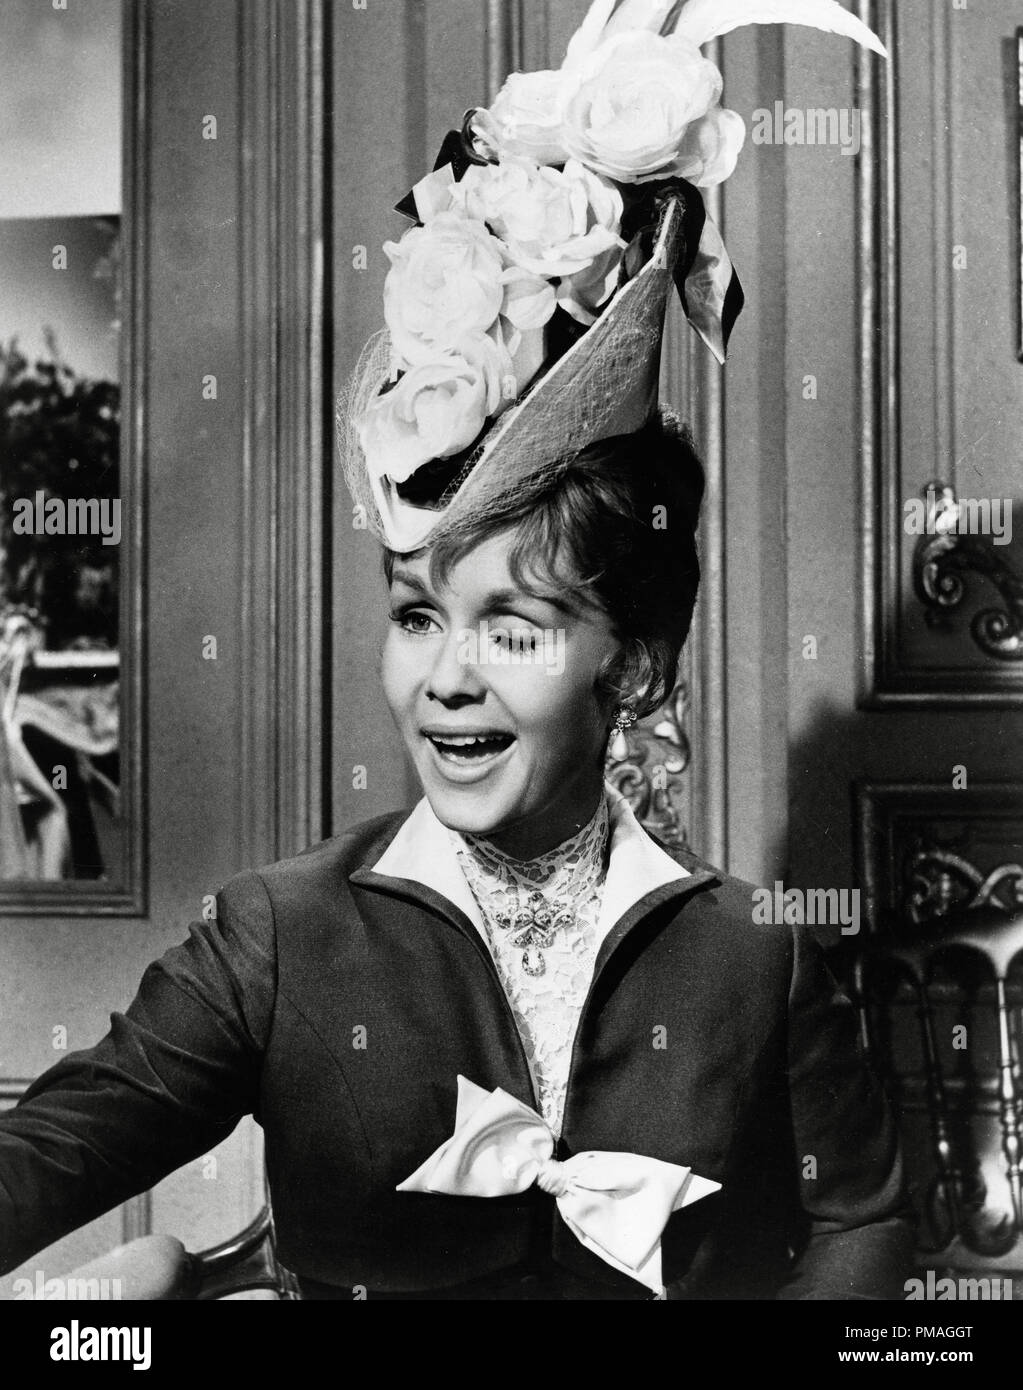 Debbie Reynolds,'The Unsinkable Molly Brown' 1964 MGM   File Reference # 32733 101THA Stock Photo